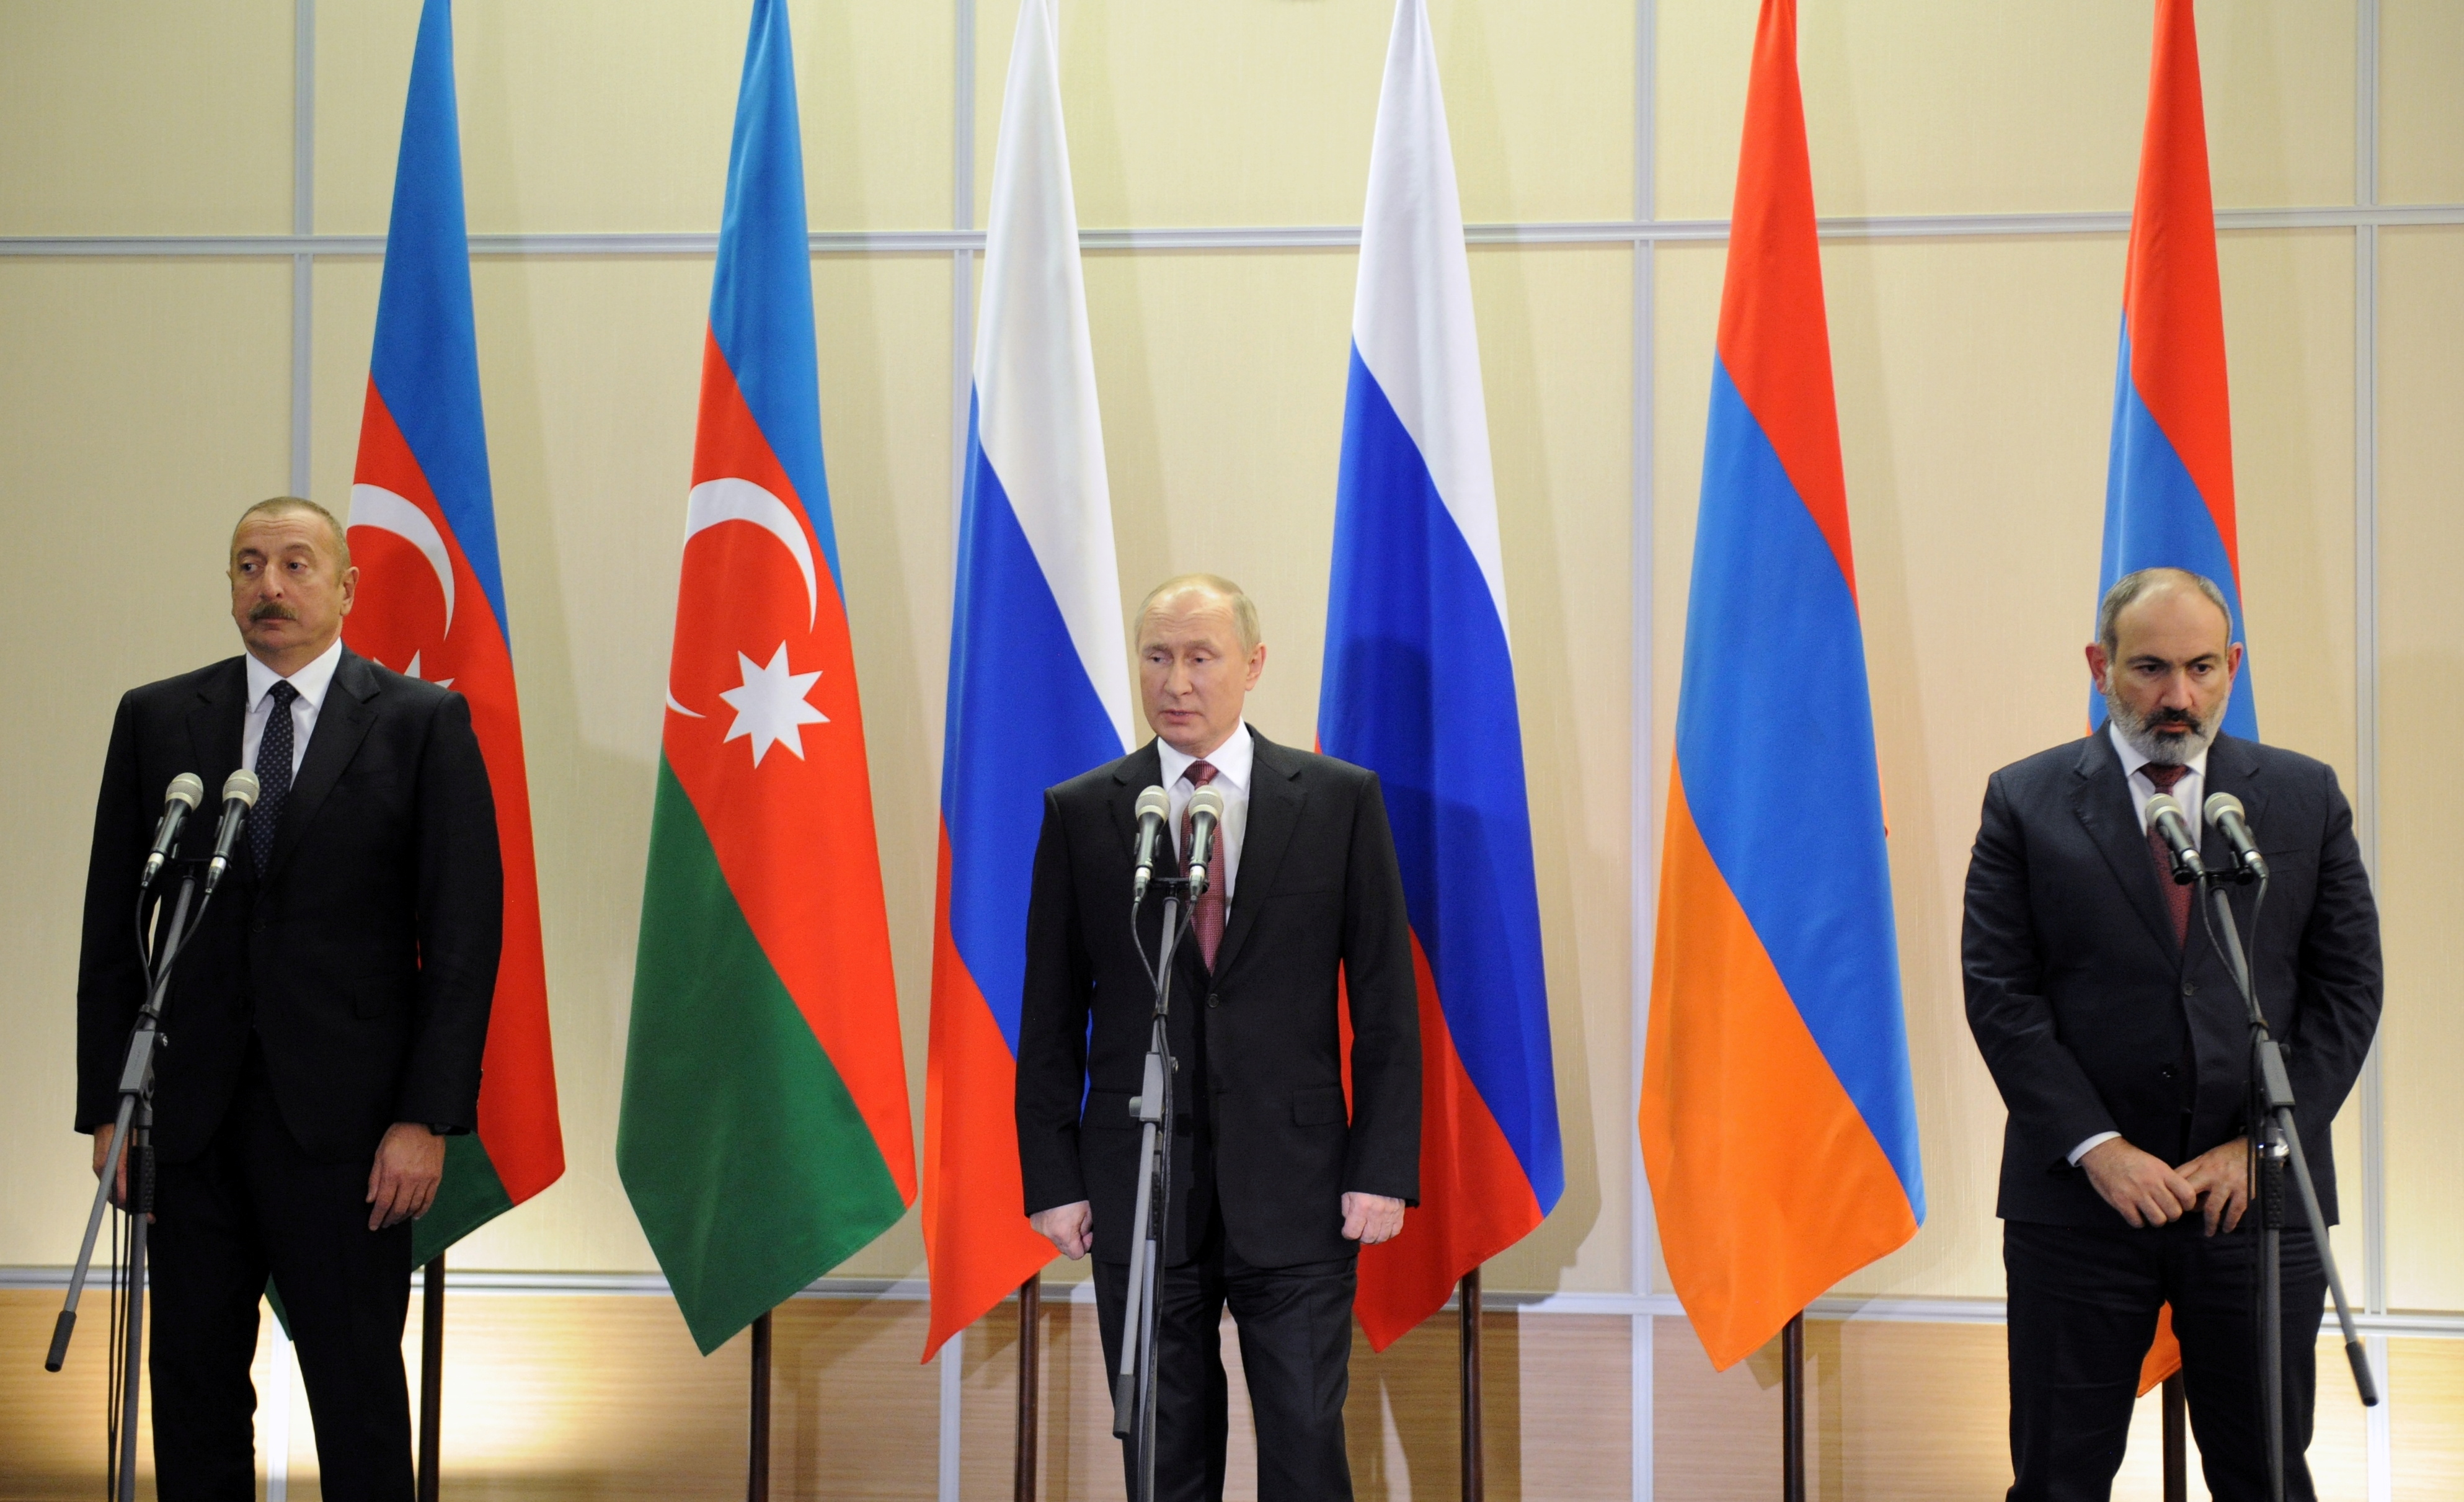 Putin gets Armenian and Azeri leaders to agree to work on defining border | Reuters